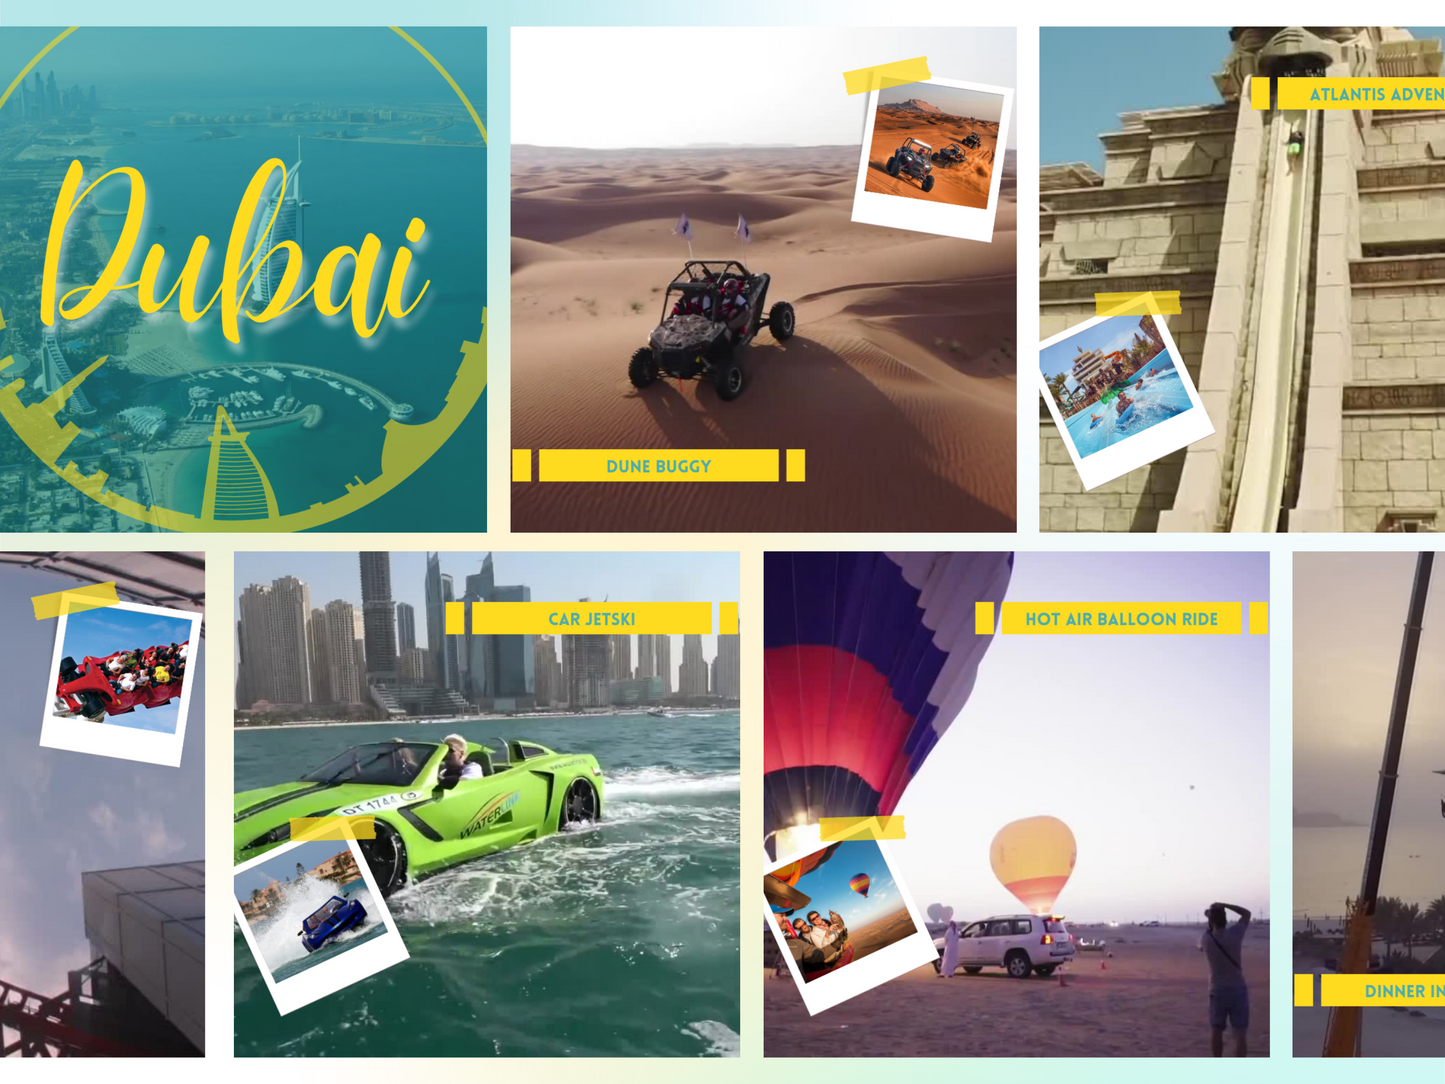 Things To Do in Dubai Part 1 and Part 2